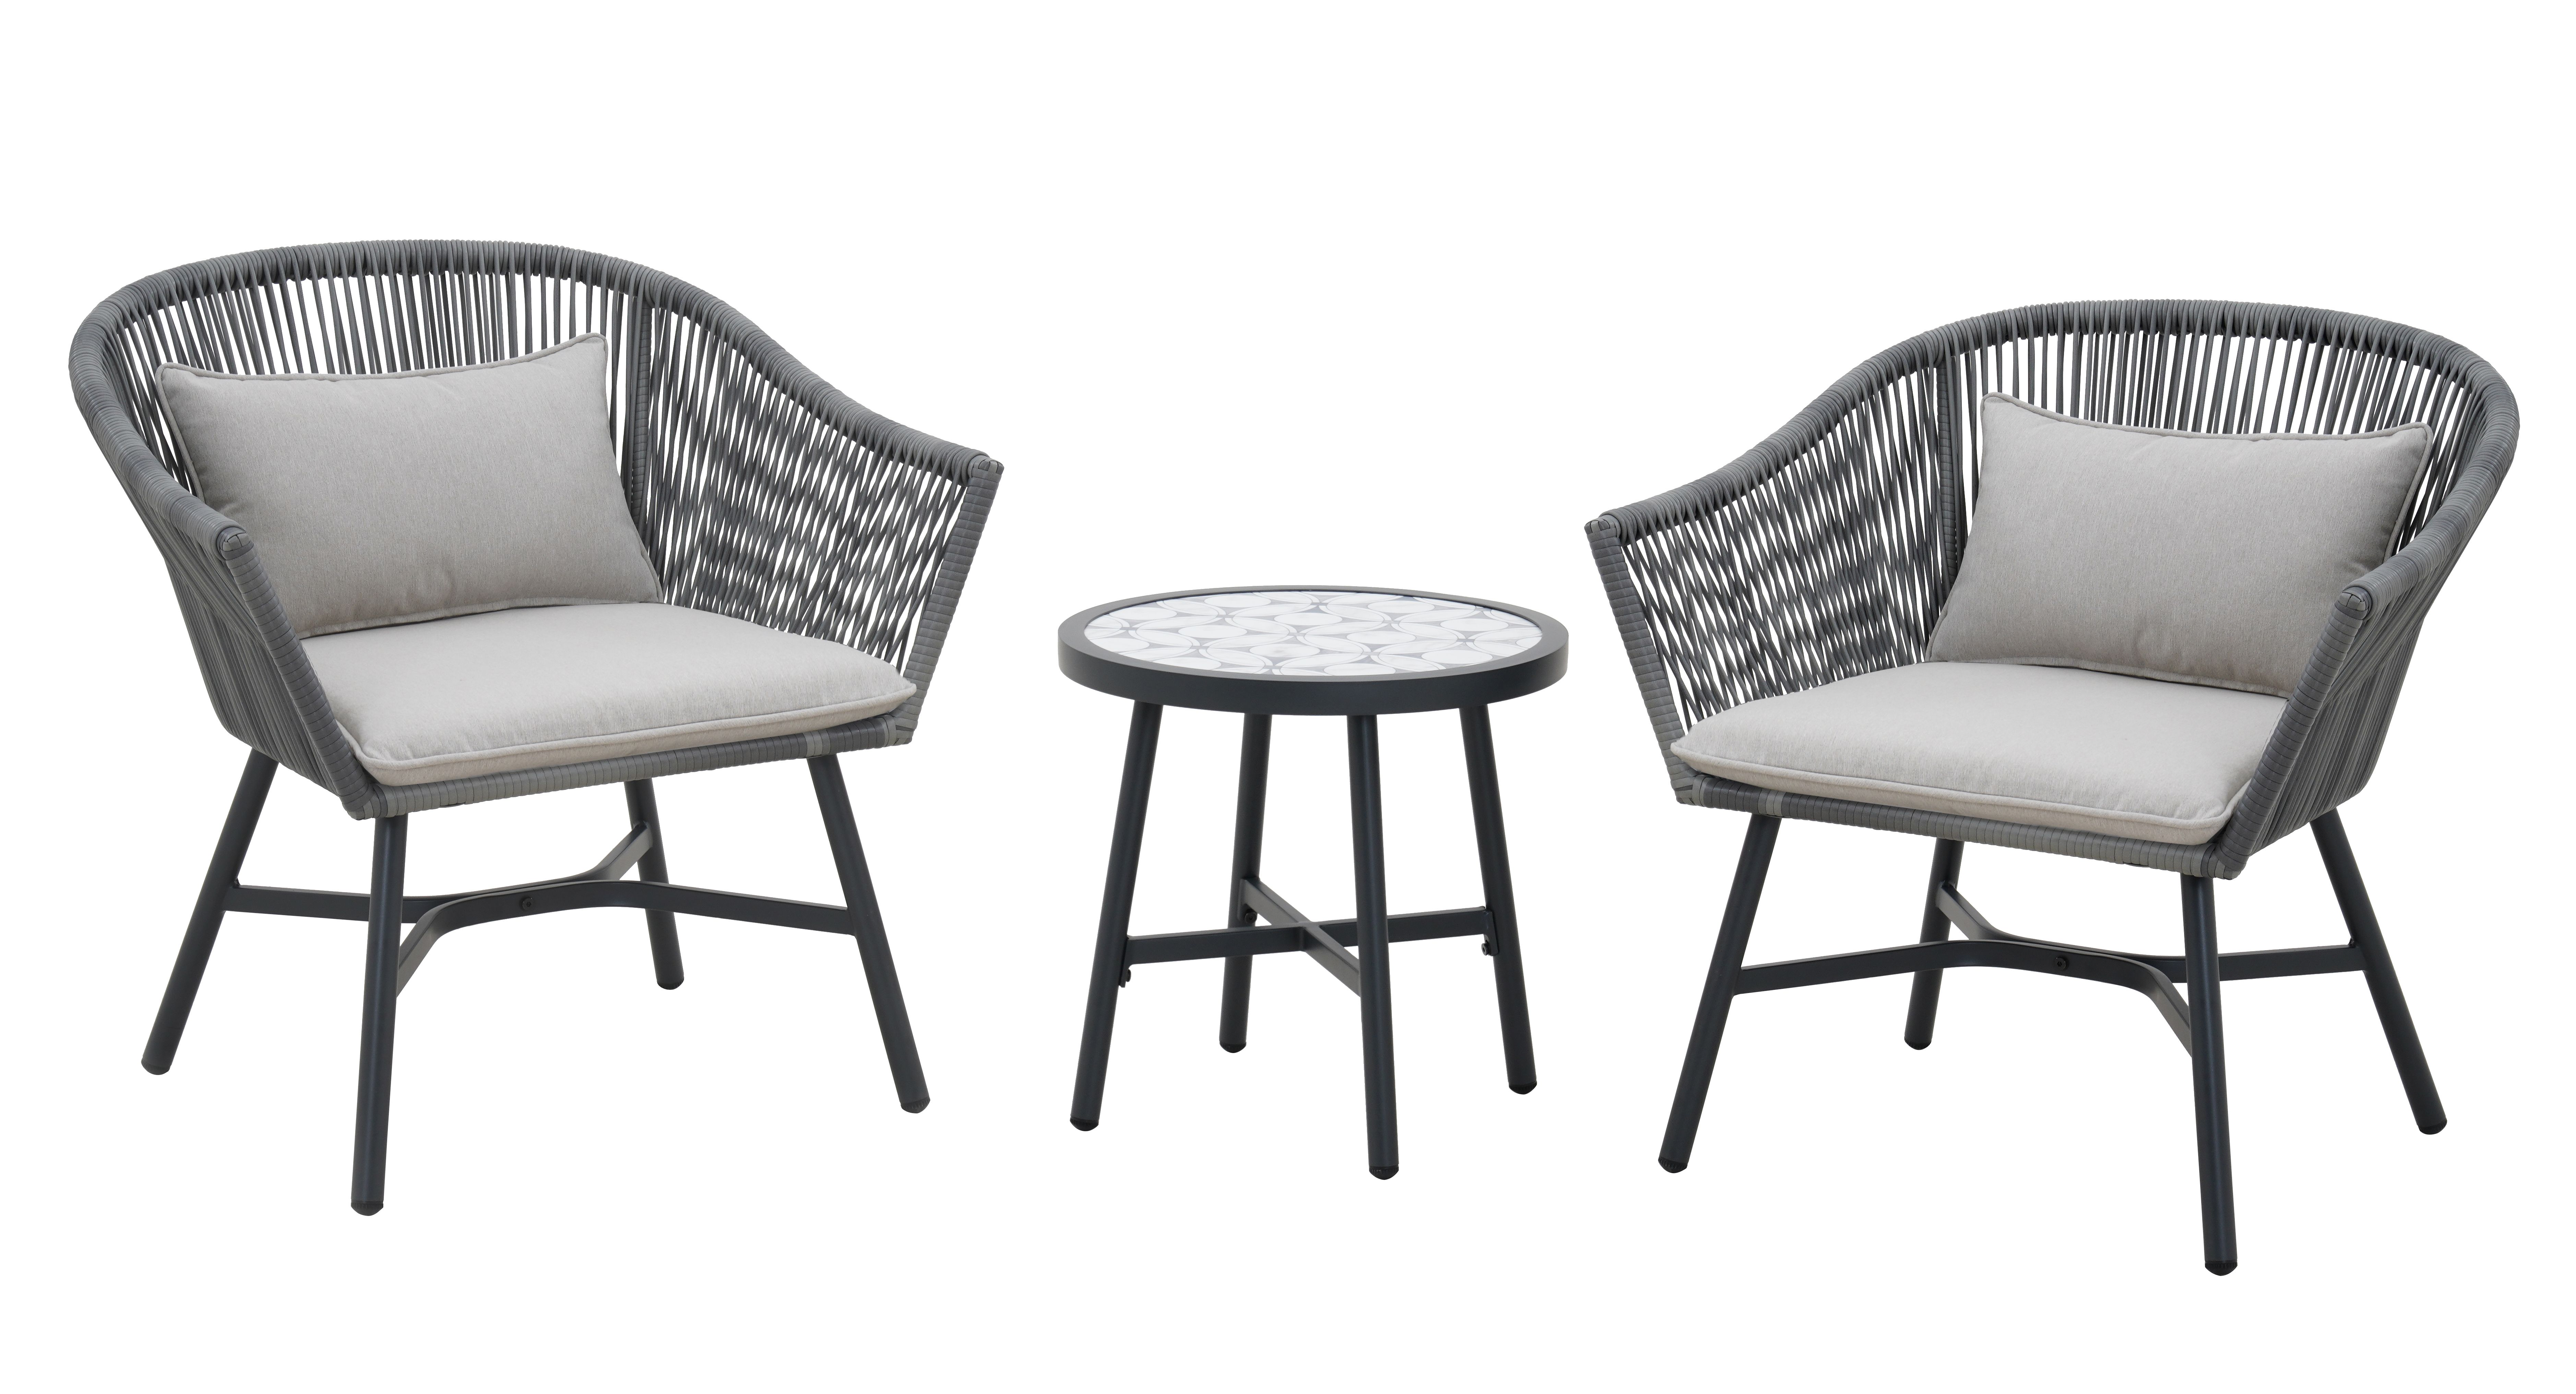 Better Homes & Gardens Blakely 3-Piece Chat Set with Tile Top Table, Gray - image 1 of 8